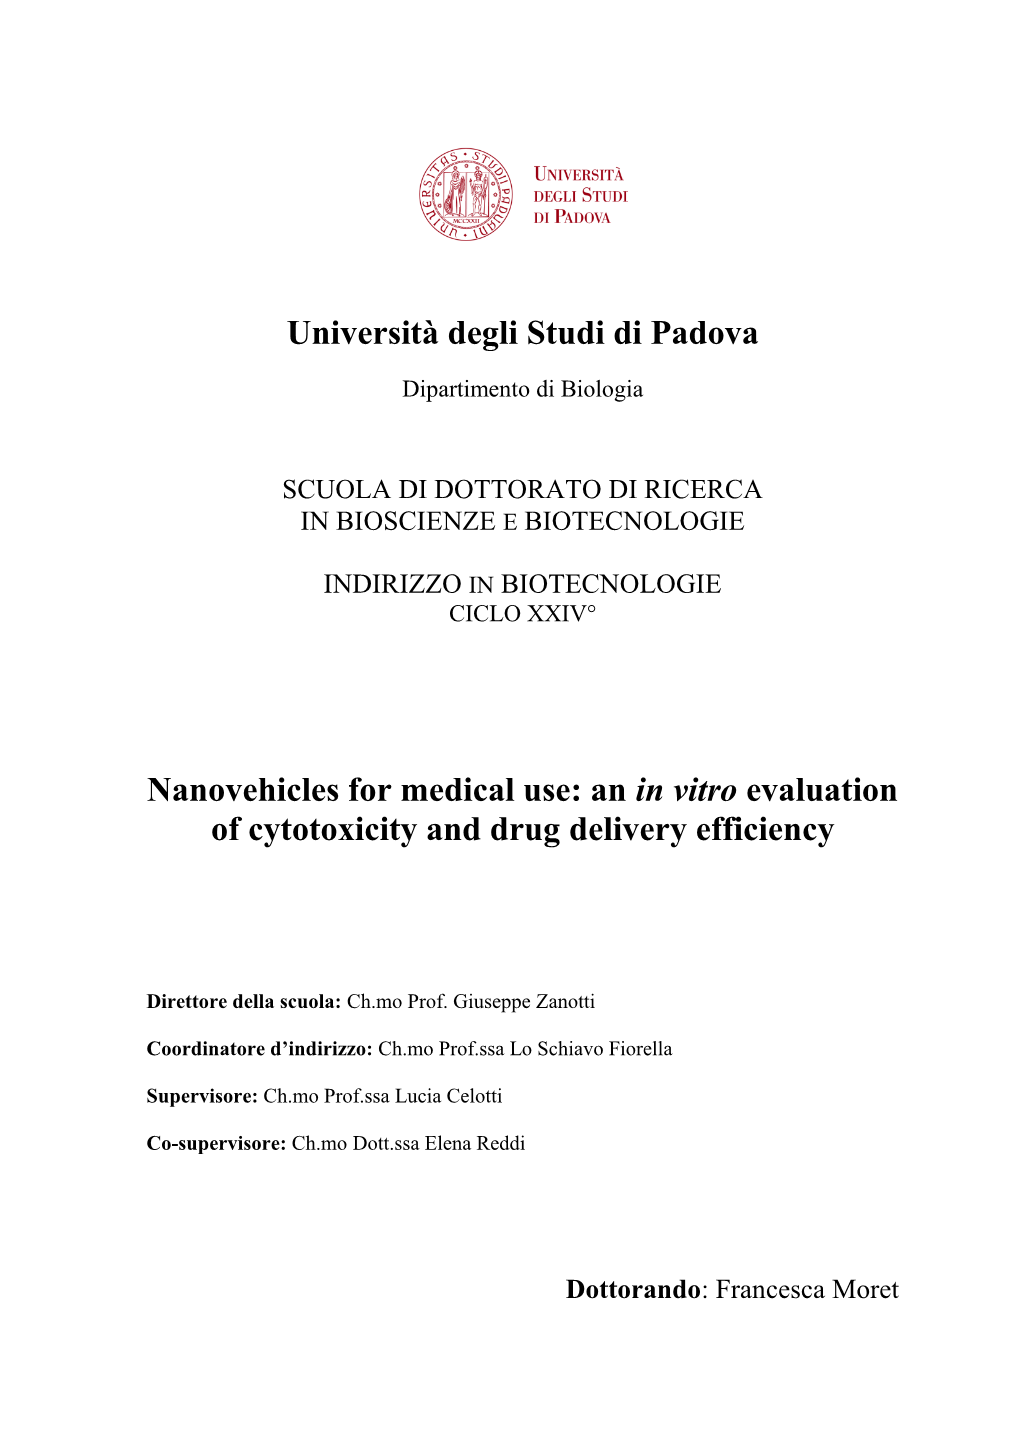 An in Vitro Evaluation of Cytotoxicity and Drug Delivery Efficiency